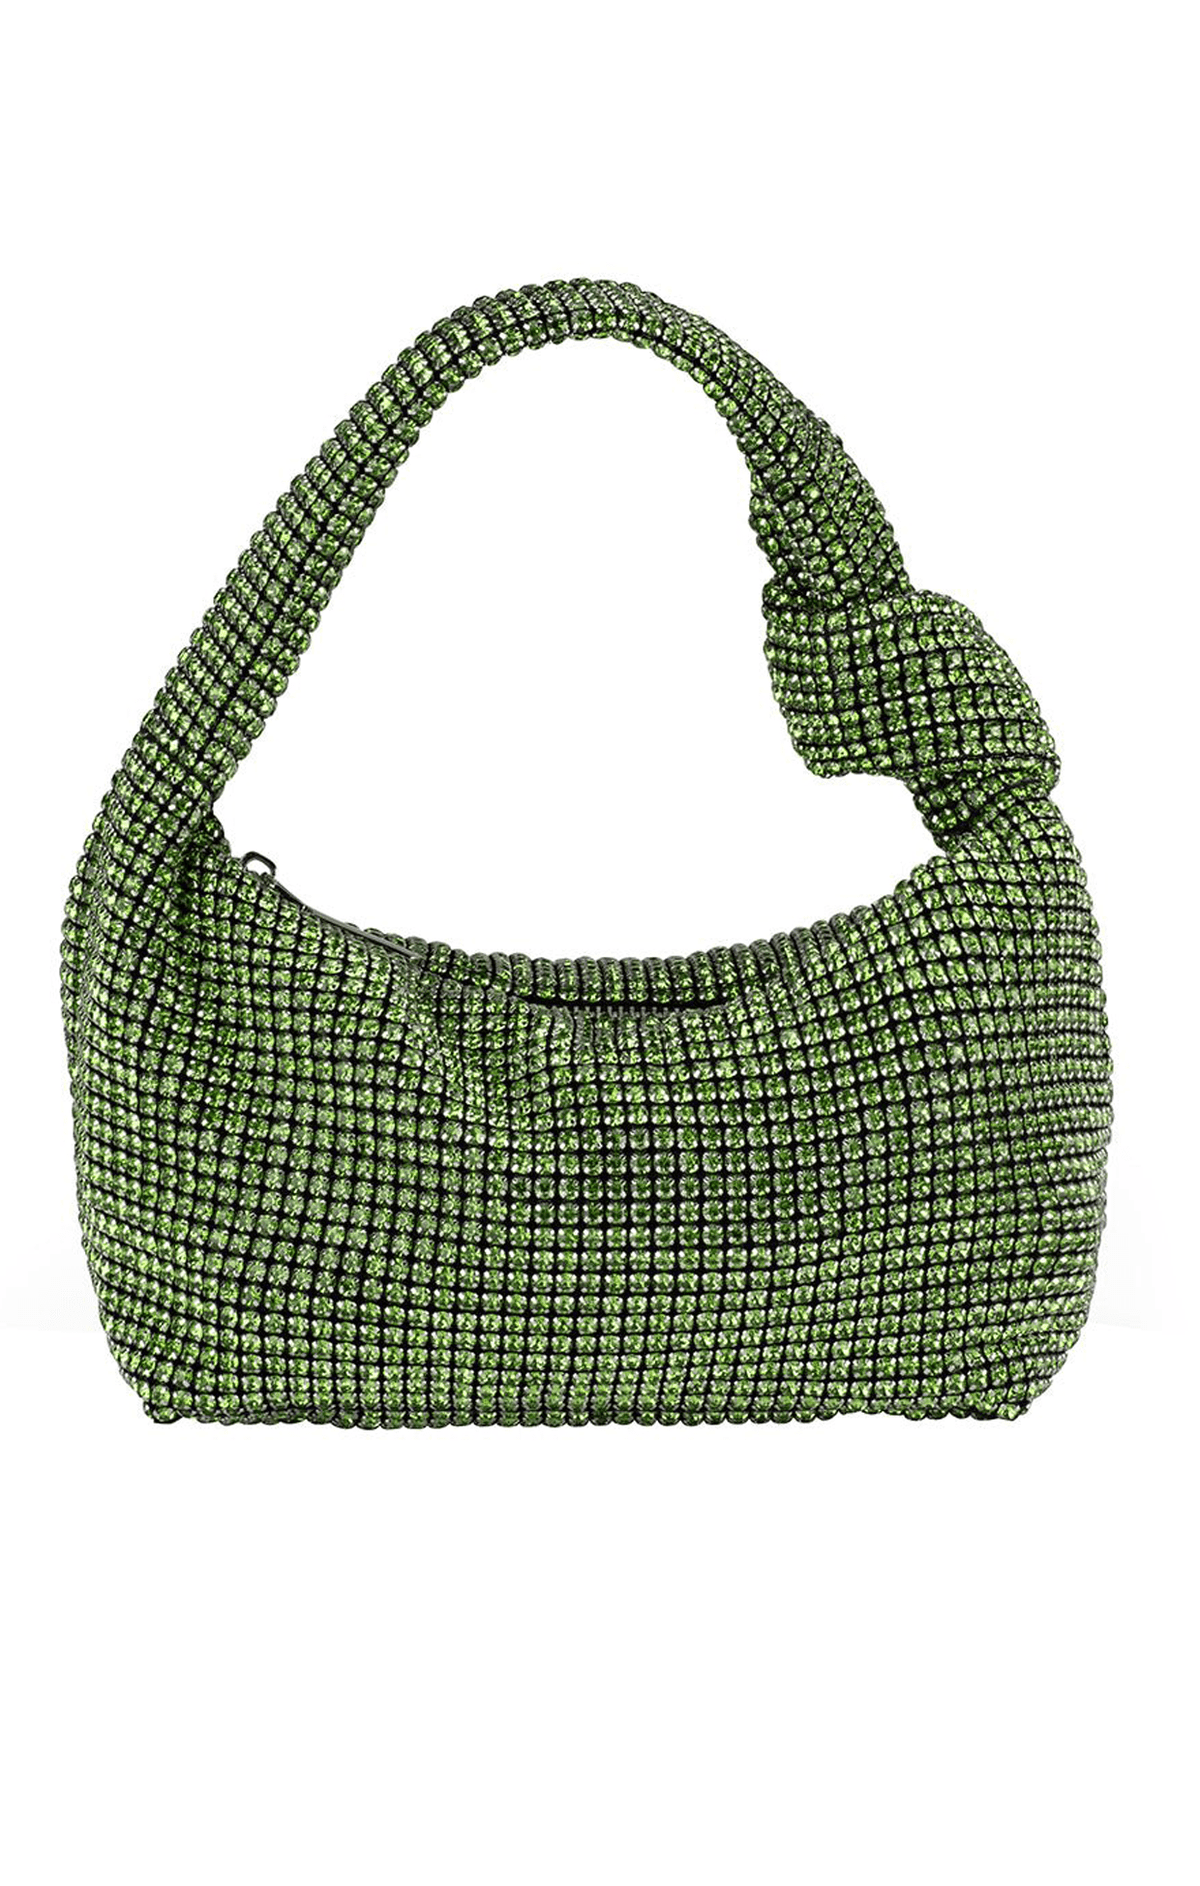 ACCESSORIES Bags Clutches One Size / Green POLLY CRYSTAL SHOULDER BAG IN GREEN